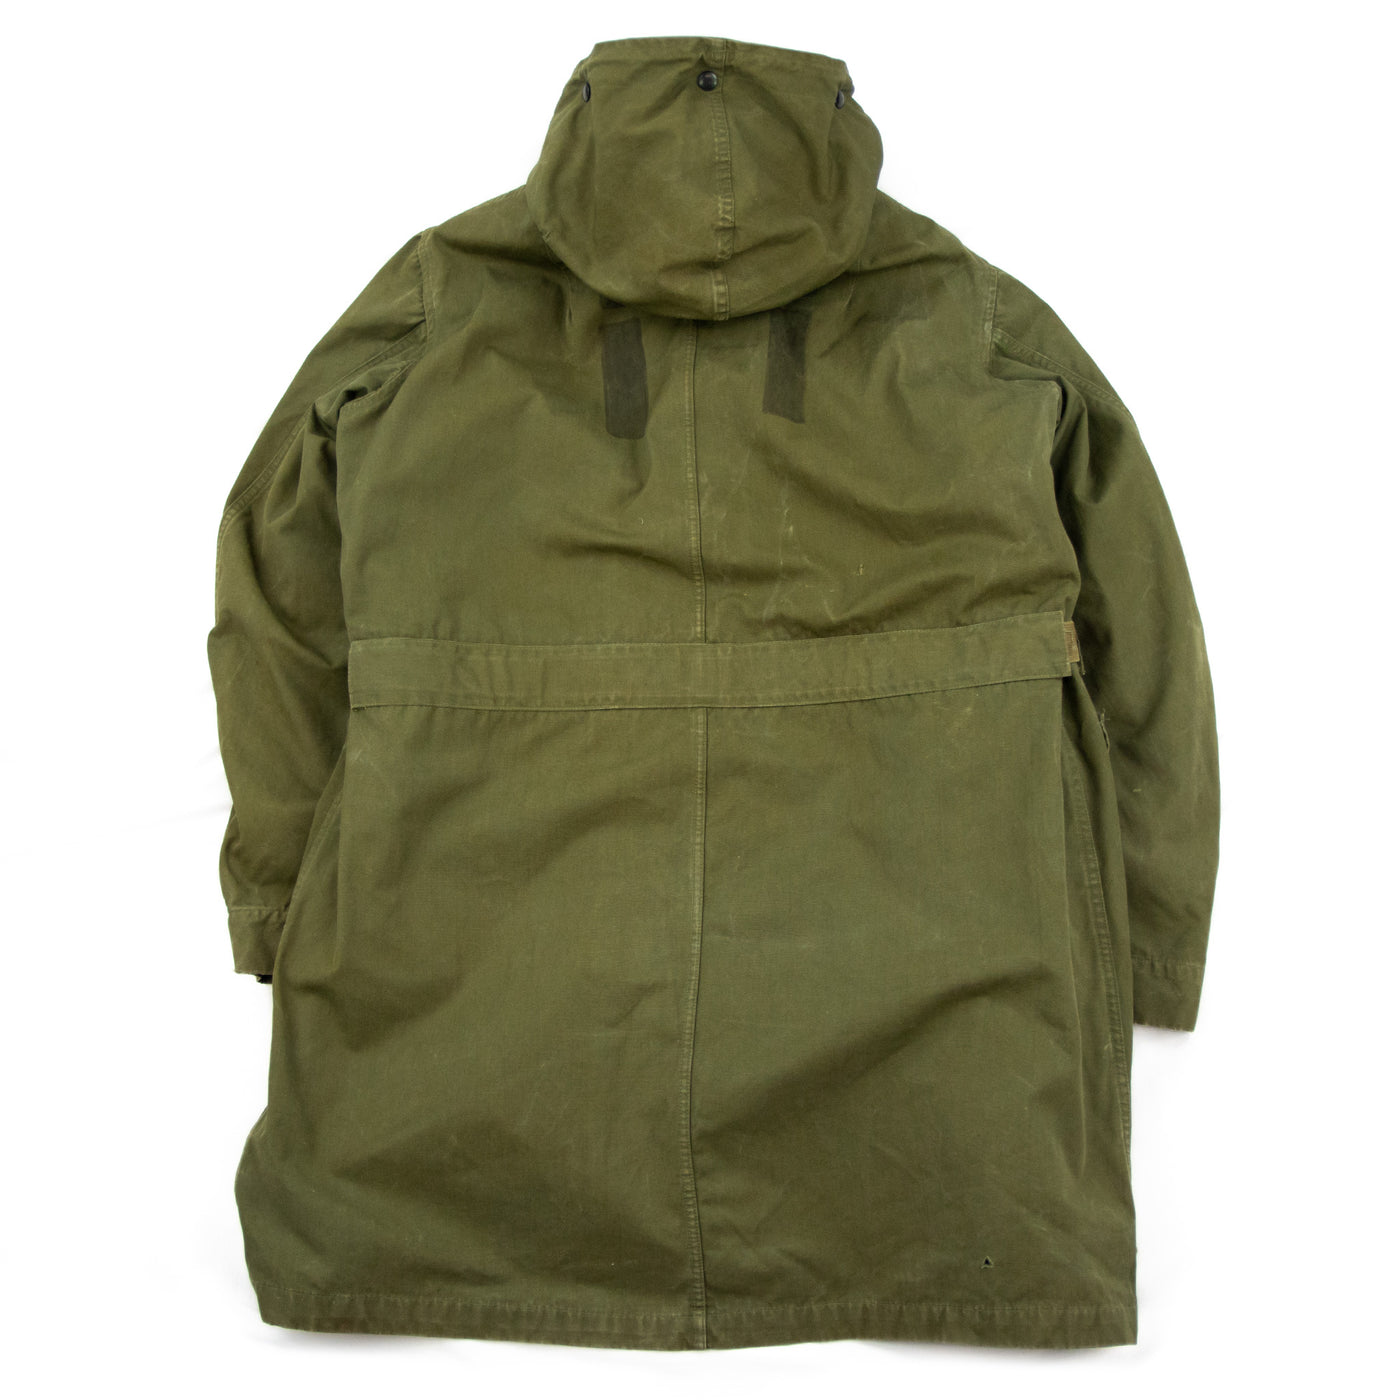 Vintage 1Vintage 1950s US Army Air Force M-47 Military Parka with Detachable Pile Liner - M - Back